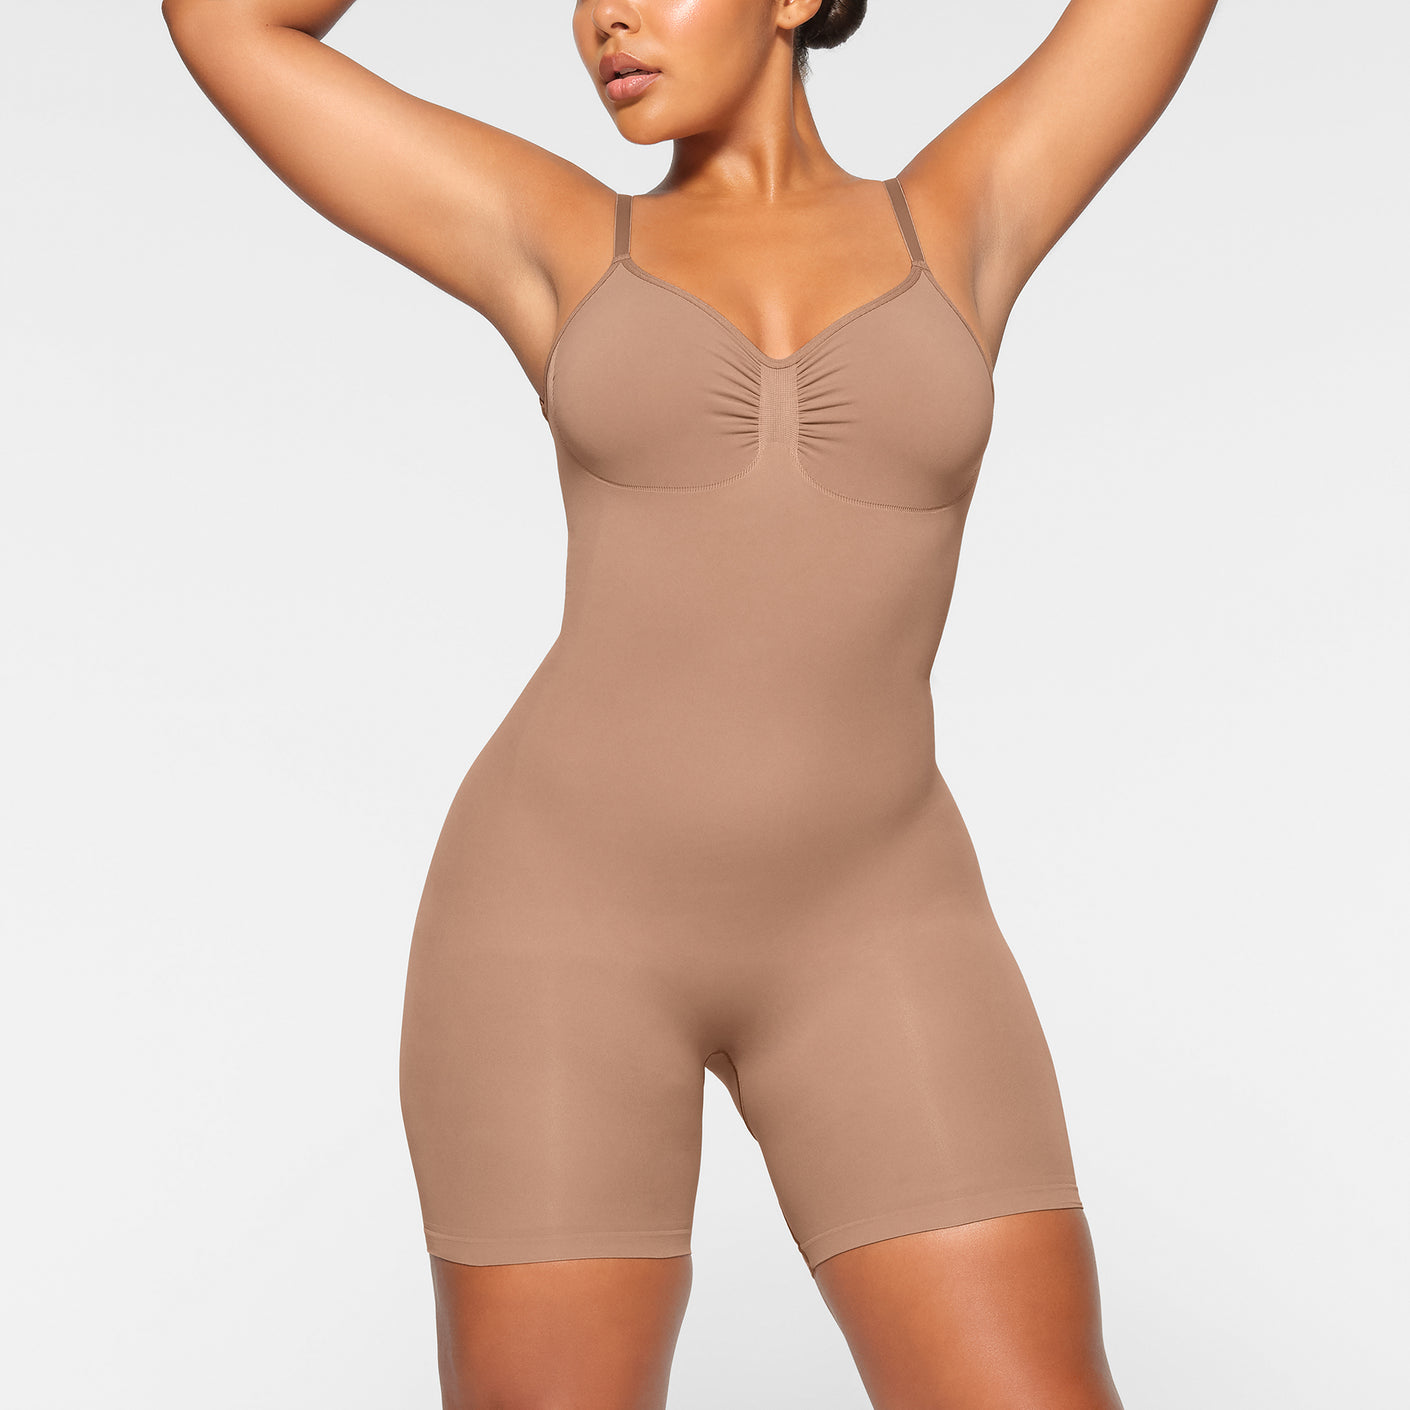 Track Barely There Low Back Mid Thigh Bodysuit - Sienna - 3X at Skims